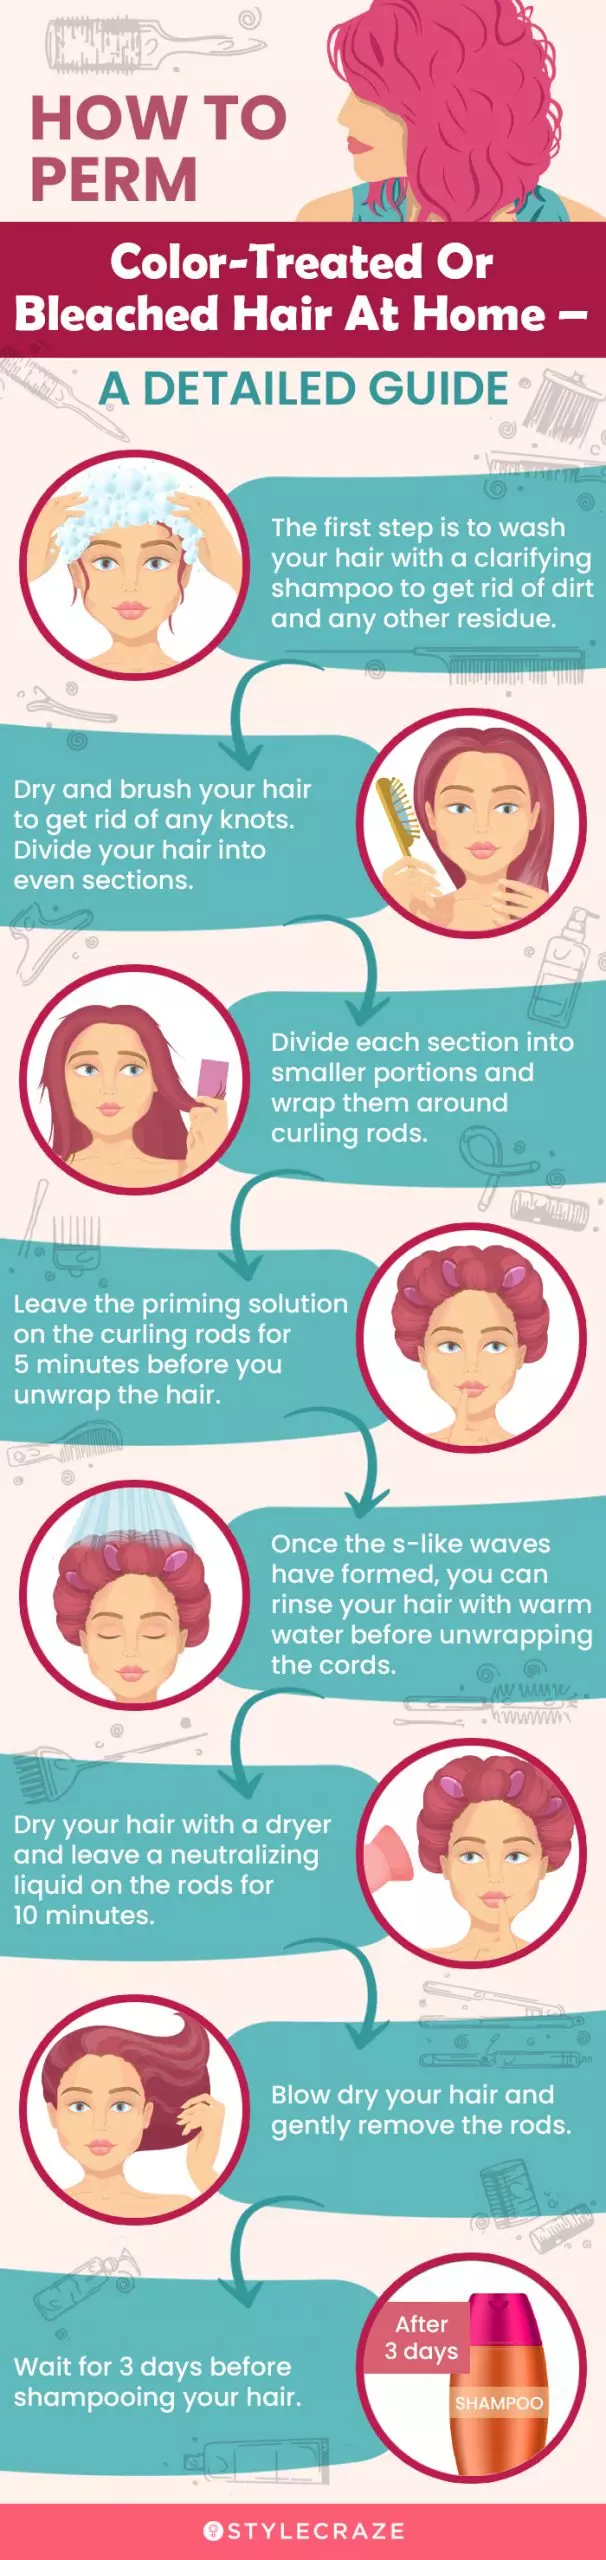 a detailed guide on how to perm color treated or bleached hair at home (infographic)